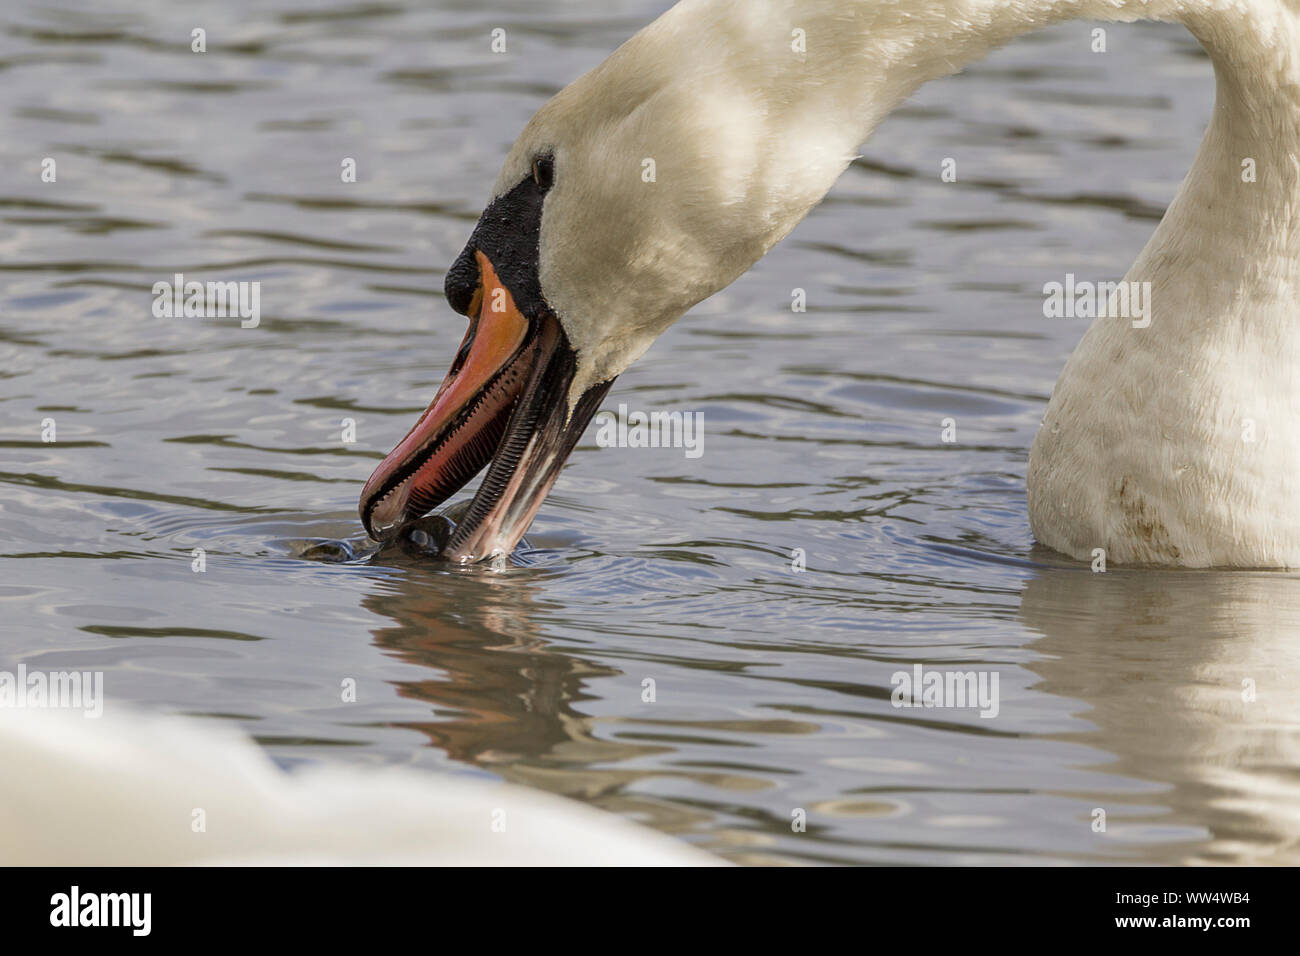 Mute swan (Cygnus olor) and plastic waste. Upturned plastic bottle in water attracting attention of a wild swan mouthing the bobbing plastic pollution Stock Photo